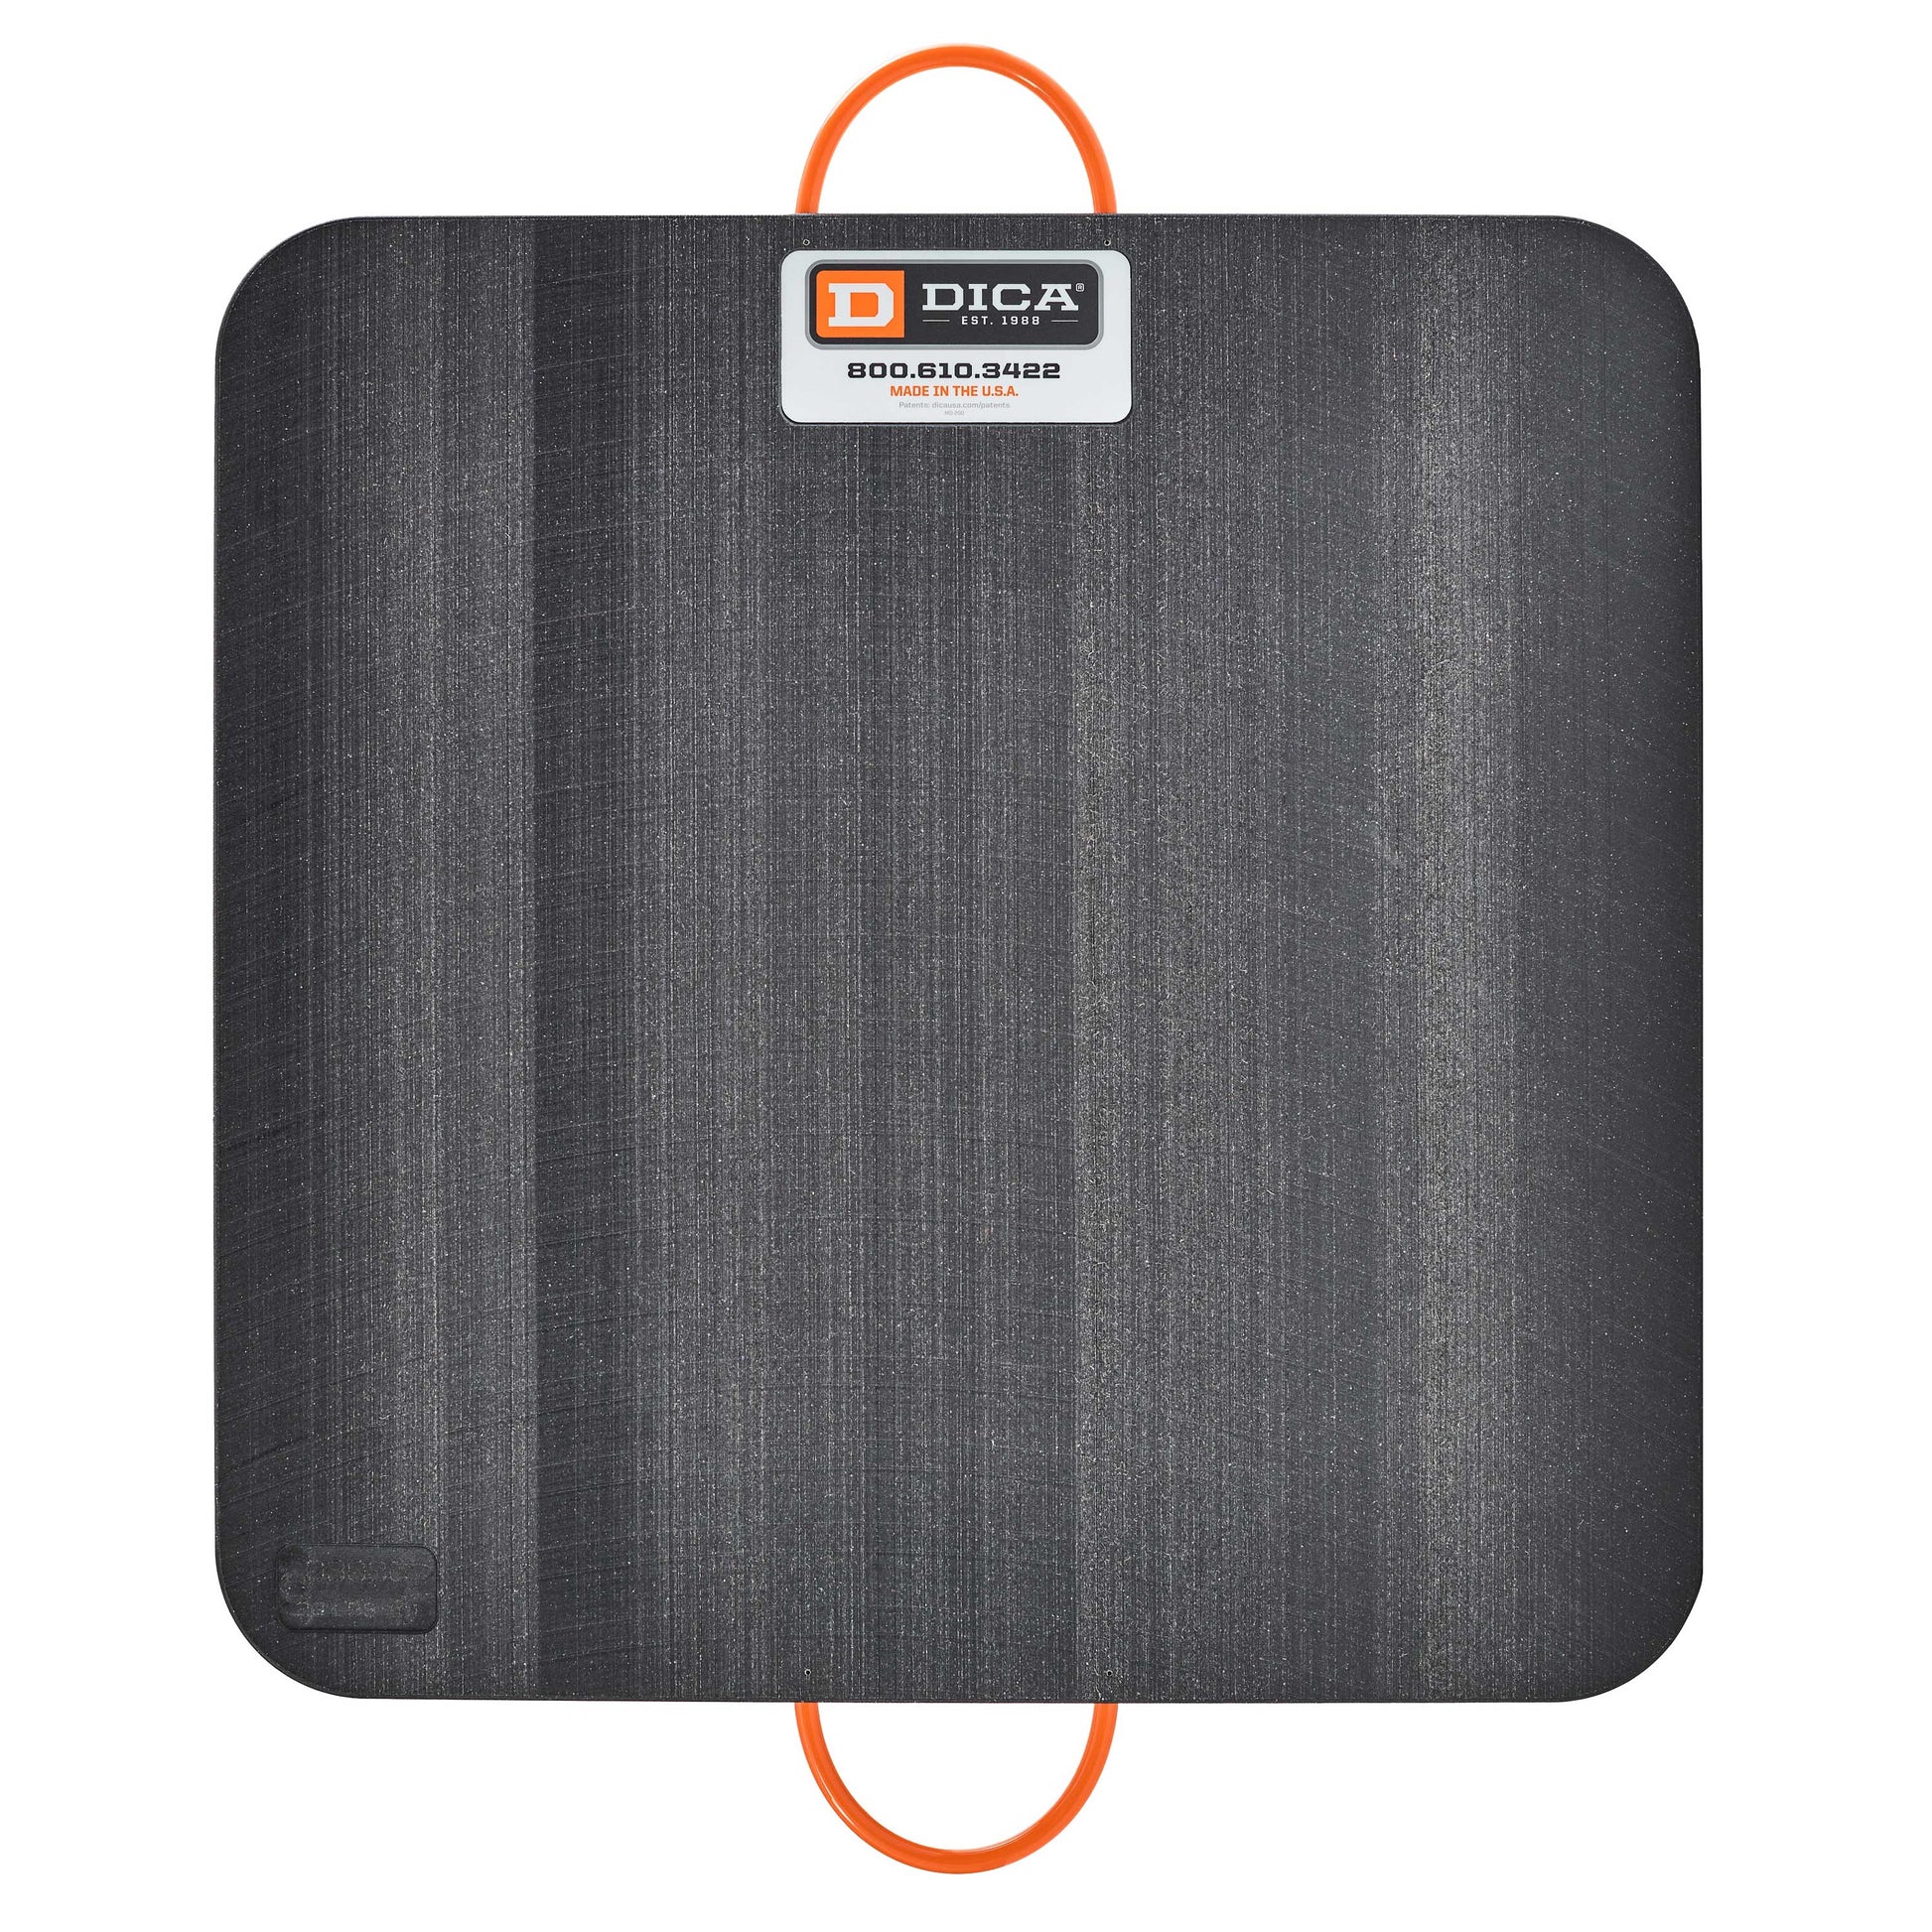 SafetyTech® 30" x 30" Outrigger Pad | Medium Duty | 1" Thick | Black Image 1 of 3